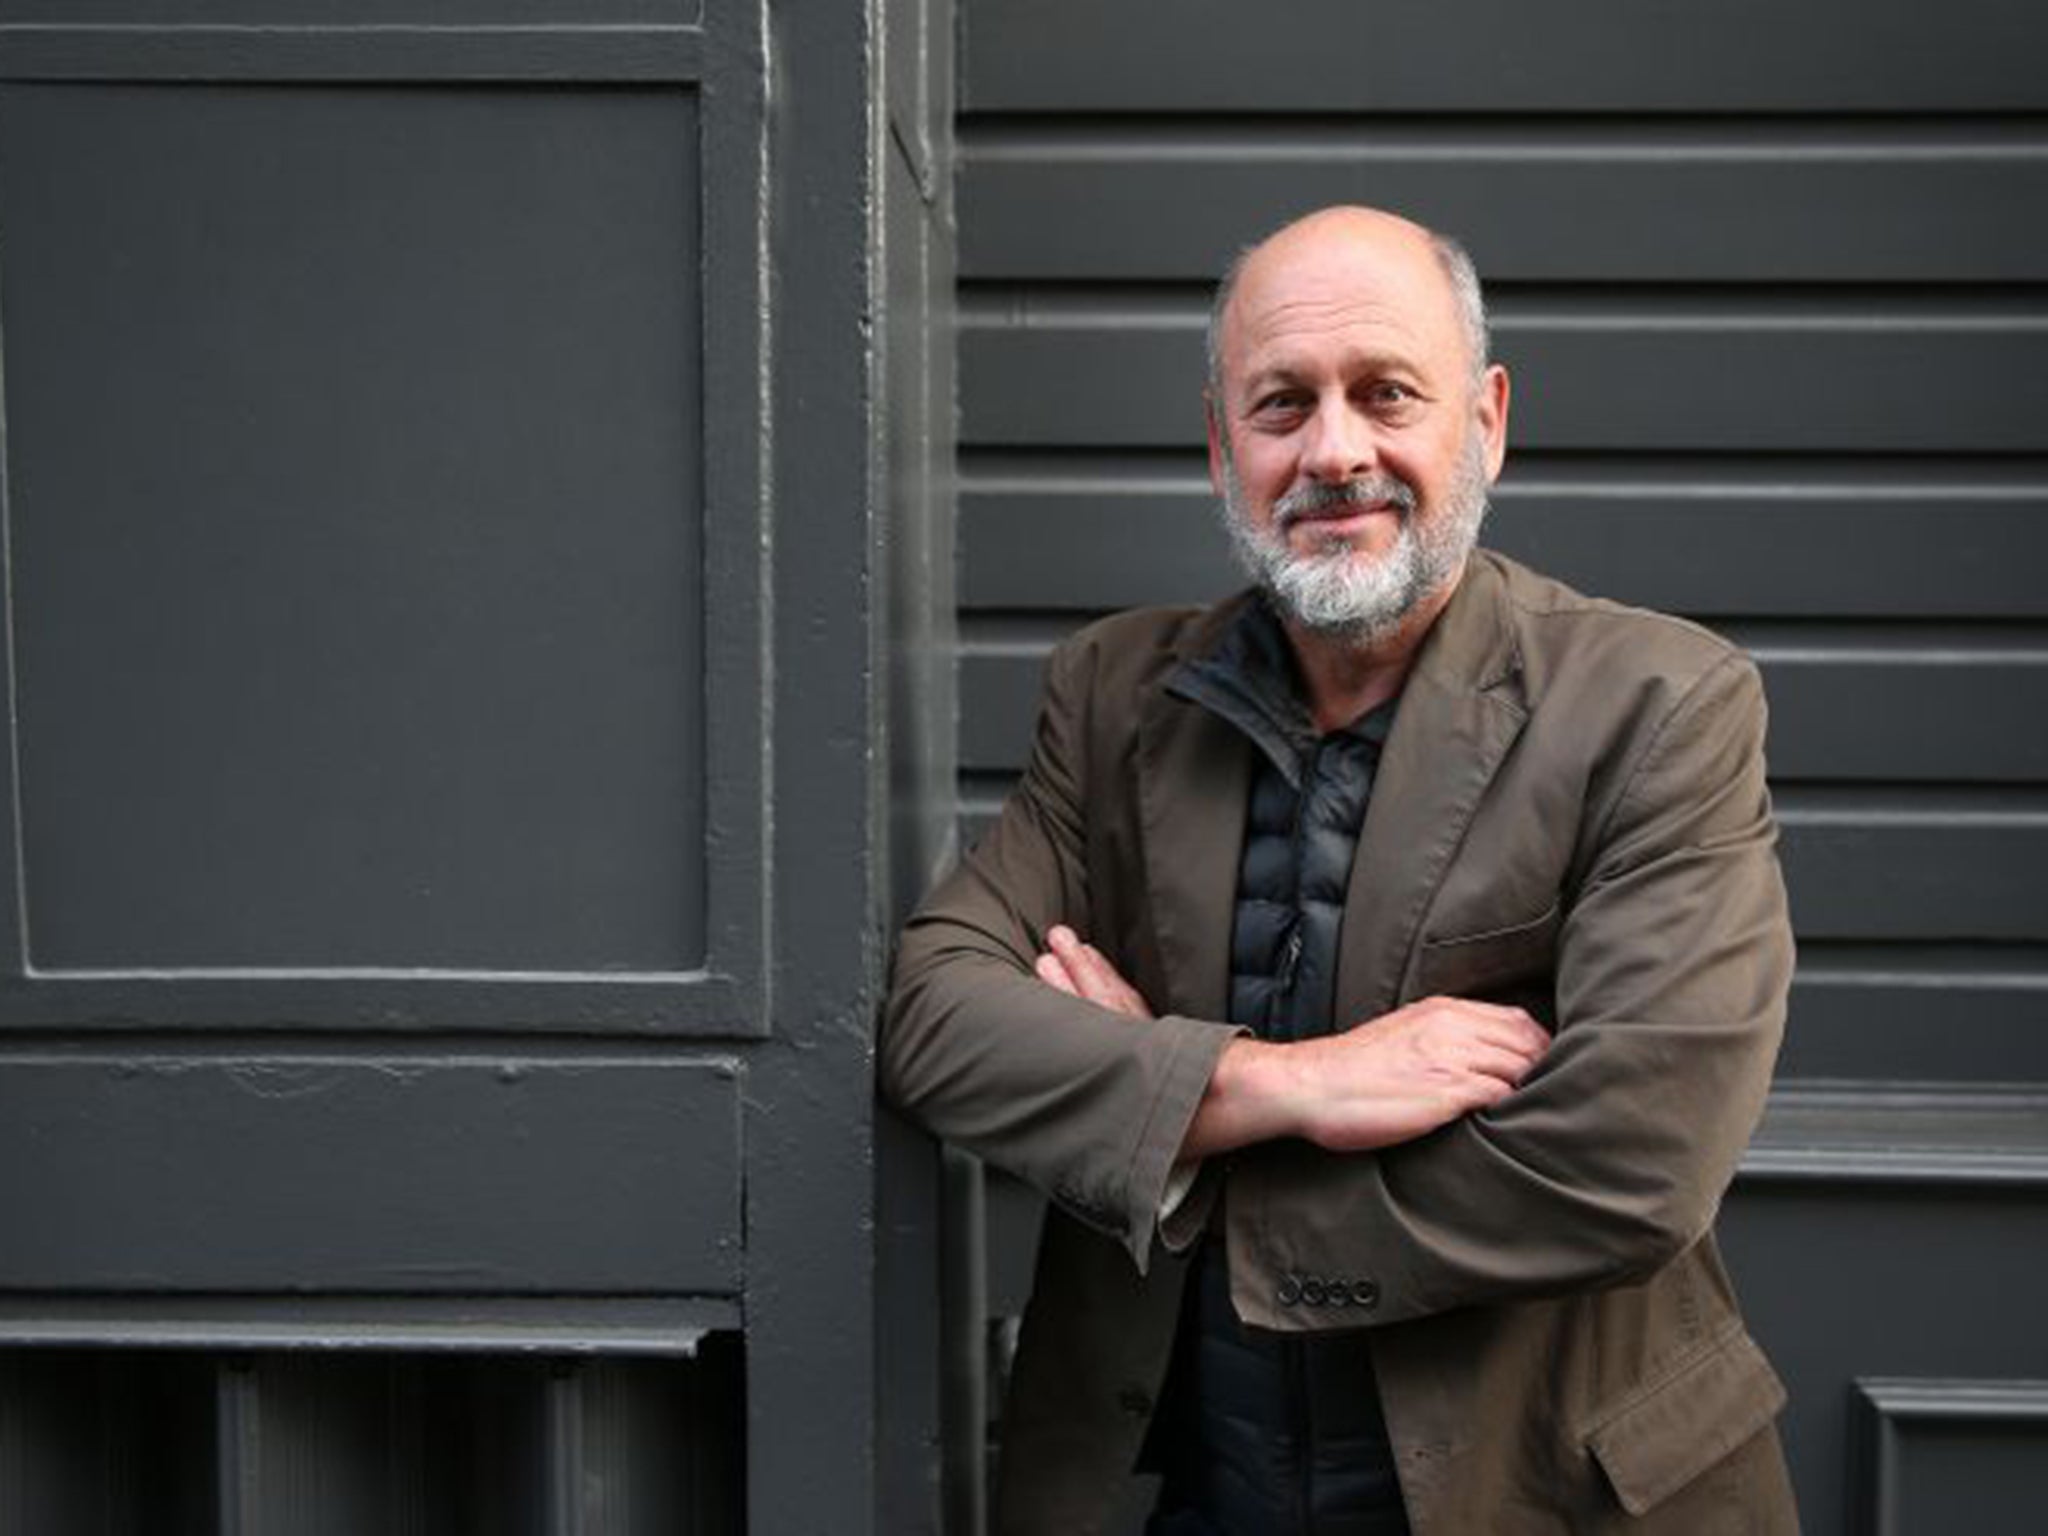 Tim Flannery has been propelled into the super-league of popular science by virtue of his opinions on climate change